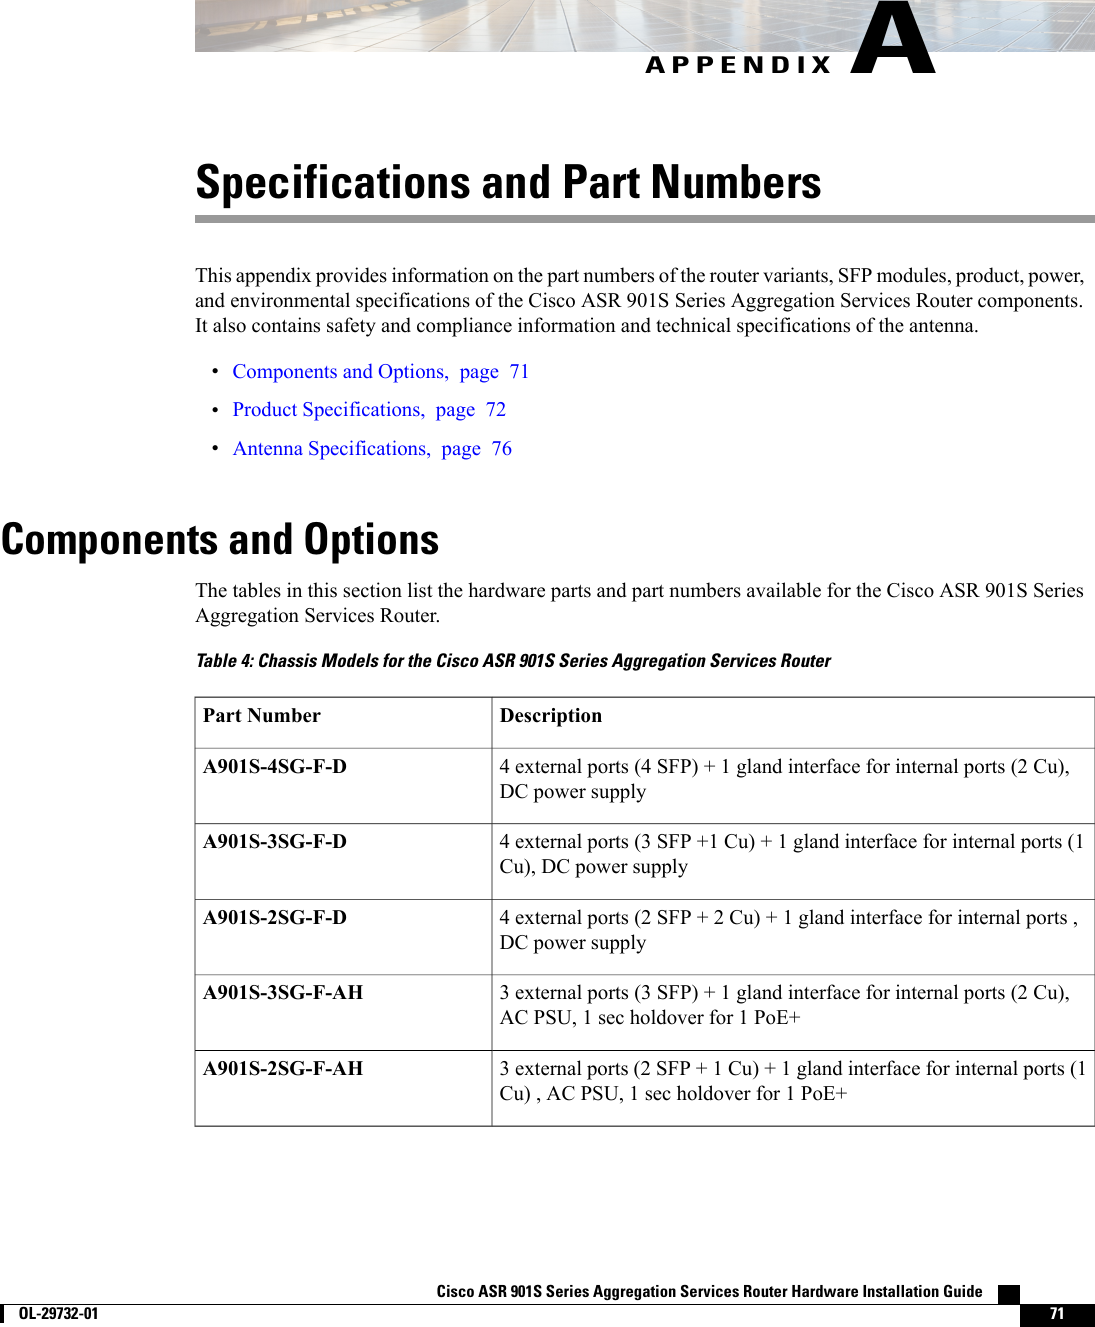 APPENDIX ASpecifications and Part NumbersThis appendix provides information on the part numbers of the router variants, SFP modules, product, power,and environmental specifications of the Cisco ASR 901S Series Aggregation Services Router components.It also contains safety and compliance information and technical specifications of the antenna.•Components and Options, page 71•Product Specifications, page 72•Antenna Specifications, page 76Components and OptionsThe tables in this section list the hardware parts and part numbers available for the Cisco ASR 901S SeriesAggregation Services Router.Table 4: Chassis Models for the Cisco ASR 901S Series Aggregation Services RouterDescriptionPart Number4 external ports (4 SFP) + 1 gland interface for internal ports (2 Cu),DC power supplyA901S-4SG-F-D4 external ports (3 SFP +1 Cu) + 1 gland interface for internal ports (1Cu), DC power supplyA901S-3SG-F-D4 external ports (2 SFP + 2 Cu) + 1 gland interface for internal ports ,DC power supplyA901S-2SG-F-D3 external ports (3 SFP) + 1 gland interface for internal ports (2 Cu),AC PSU, 1 sec holdover for 1 PoE+A901S-3SG-F-AH3 external ports (2 SFP + 1 Cu) + 1 gland interface for internal ports (1Cu) , AC PSU, 1 sec holdover for 1 PoE+A901S-2SG-F-AHCisco ASR 901S Series Aggregation Services Router Hardware Installation Guide        OL-29732-01 71